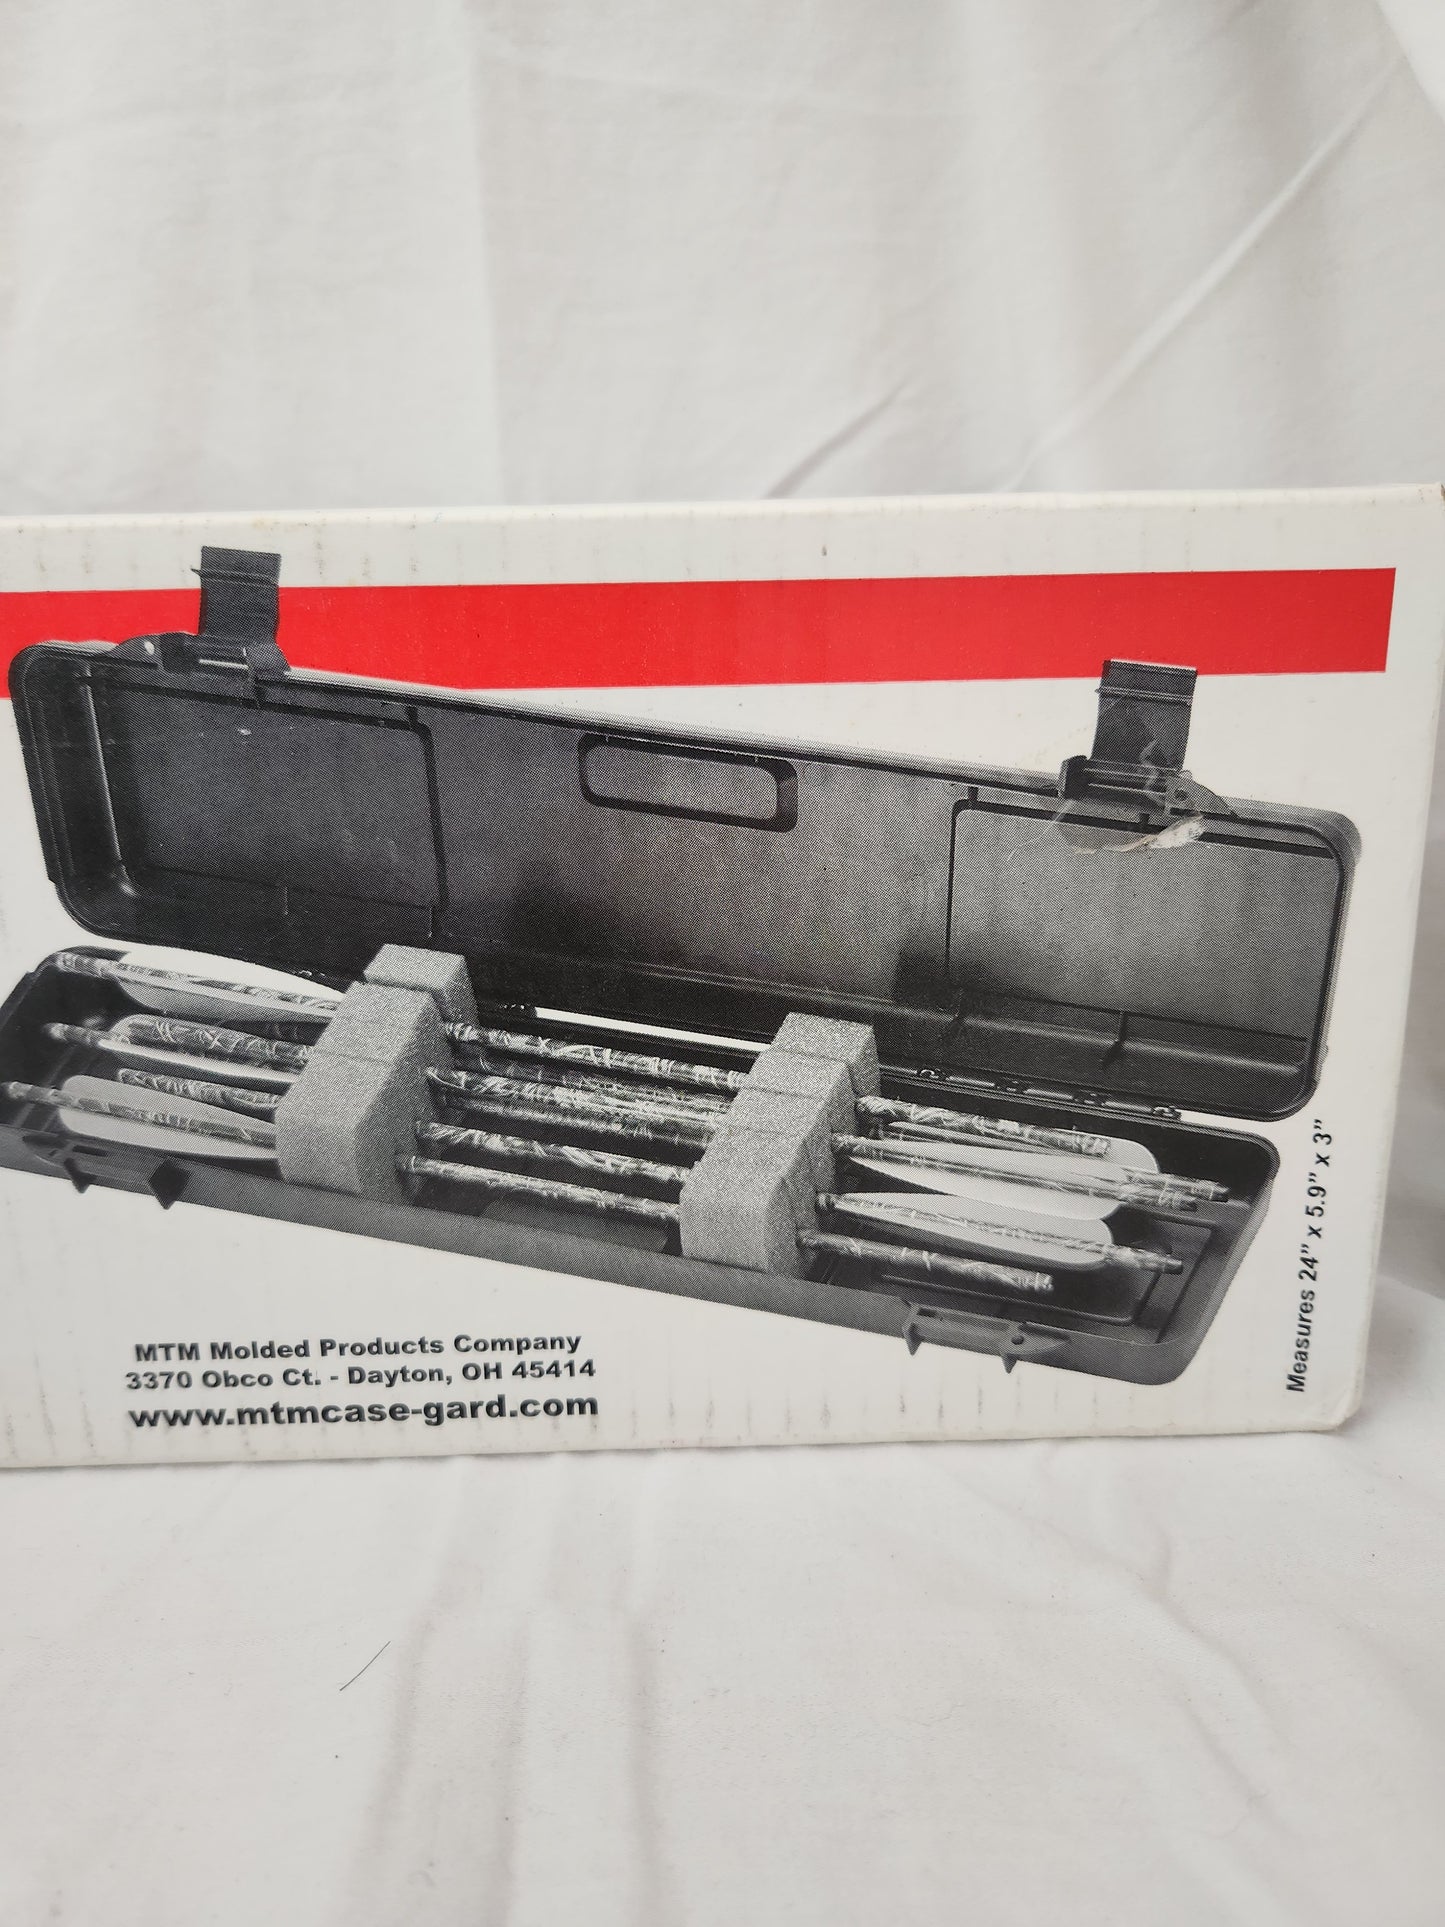 MTM Crossbow Bolt Case (holds 12 bolts up to 23" long)